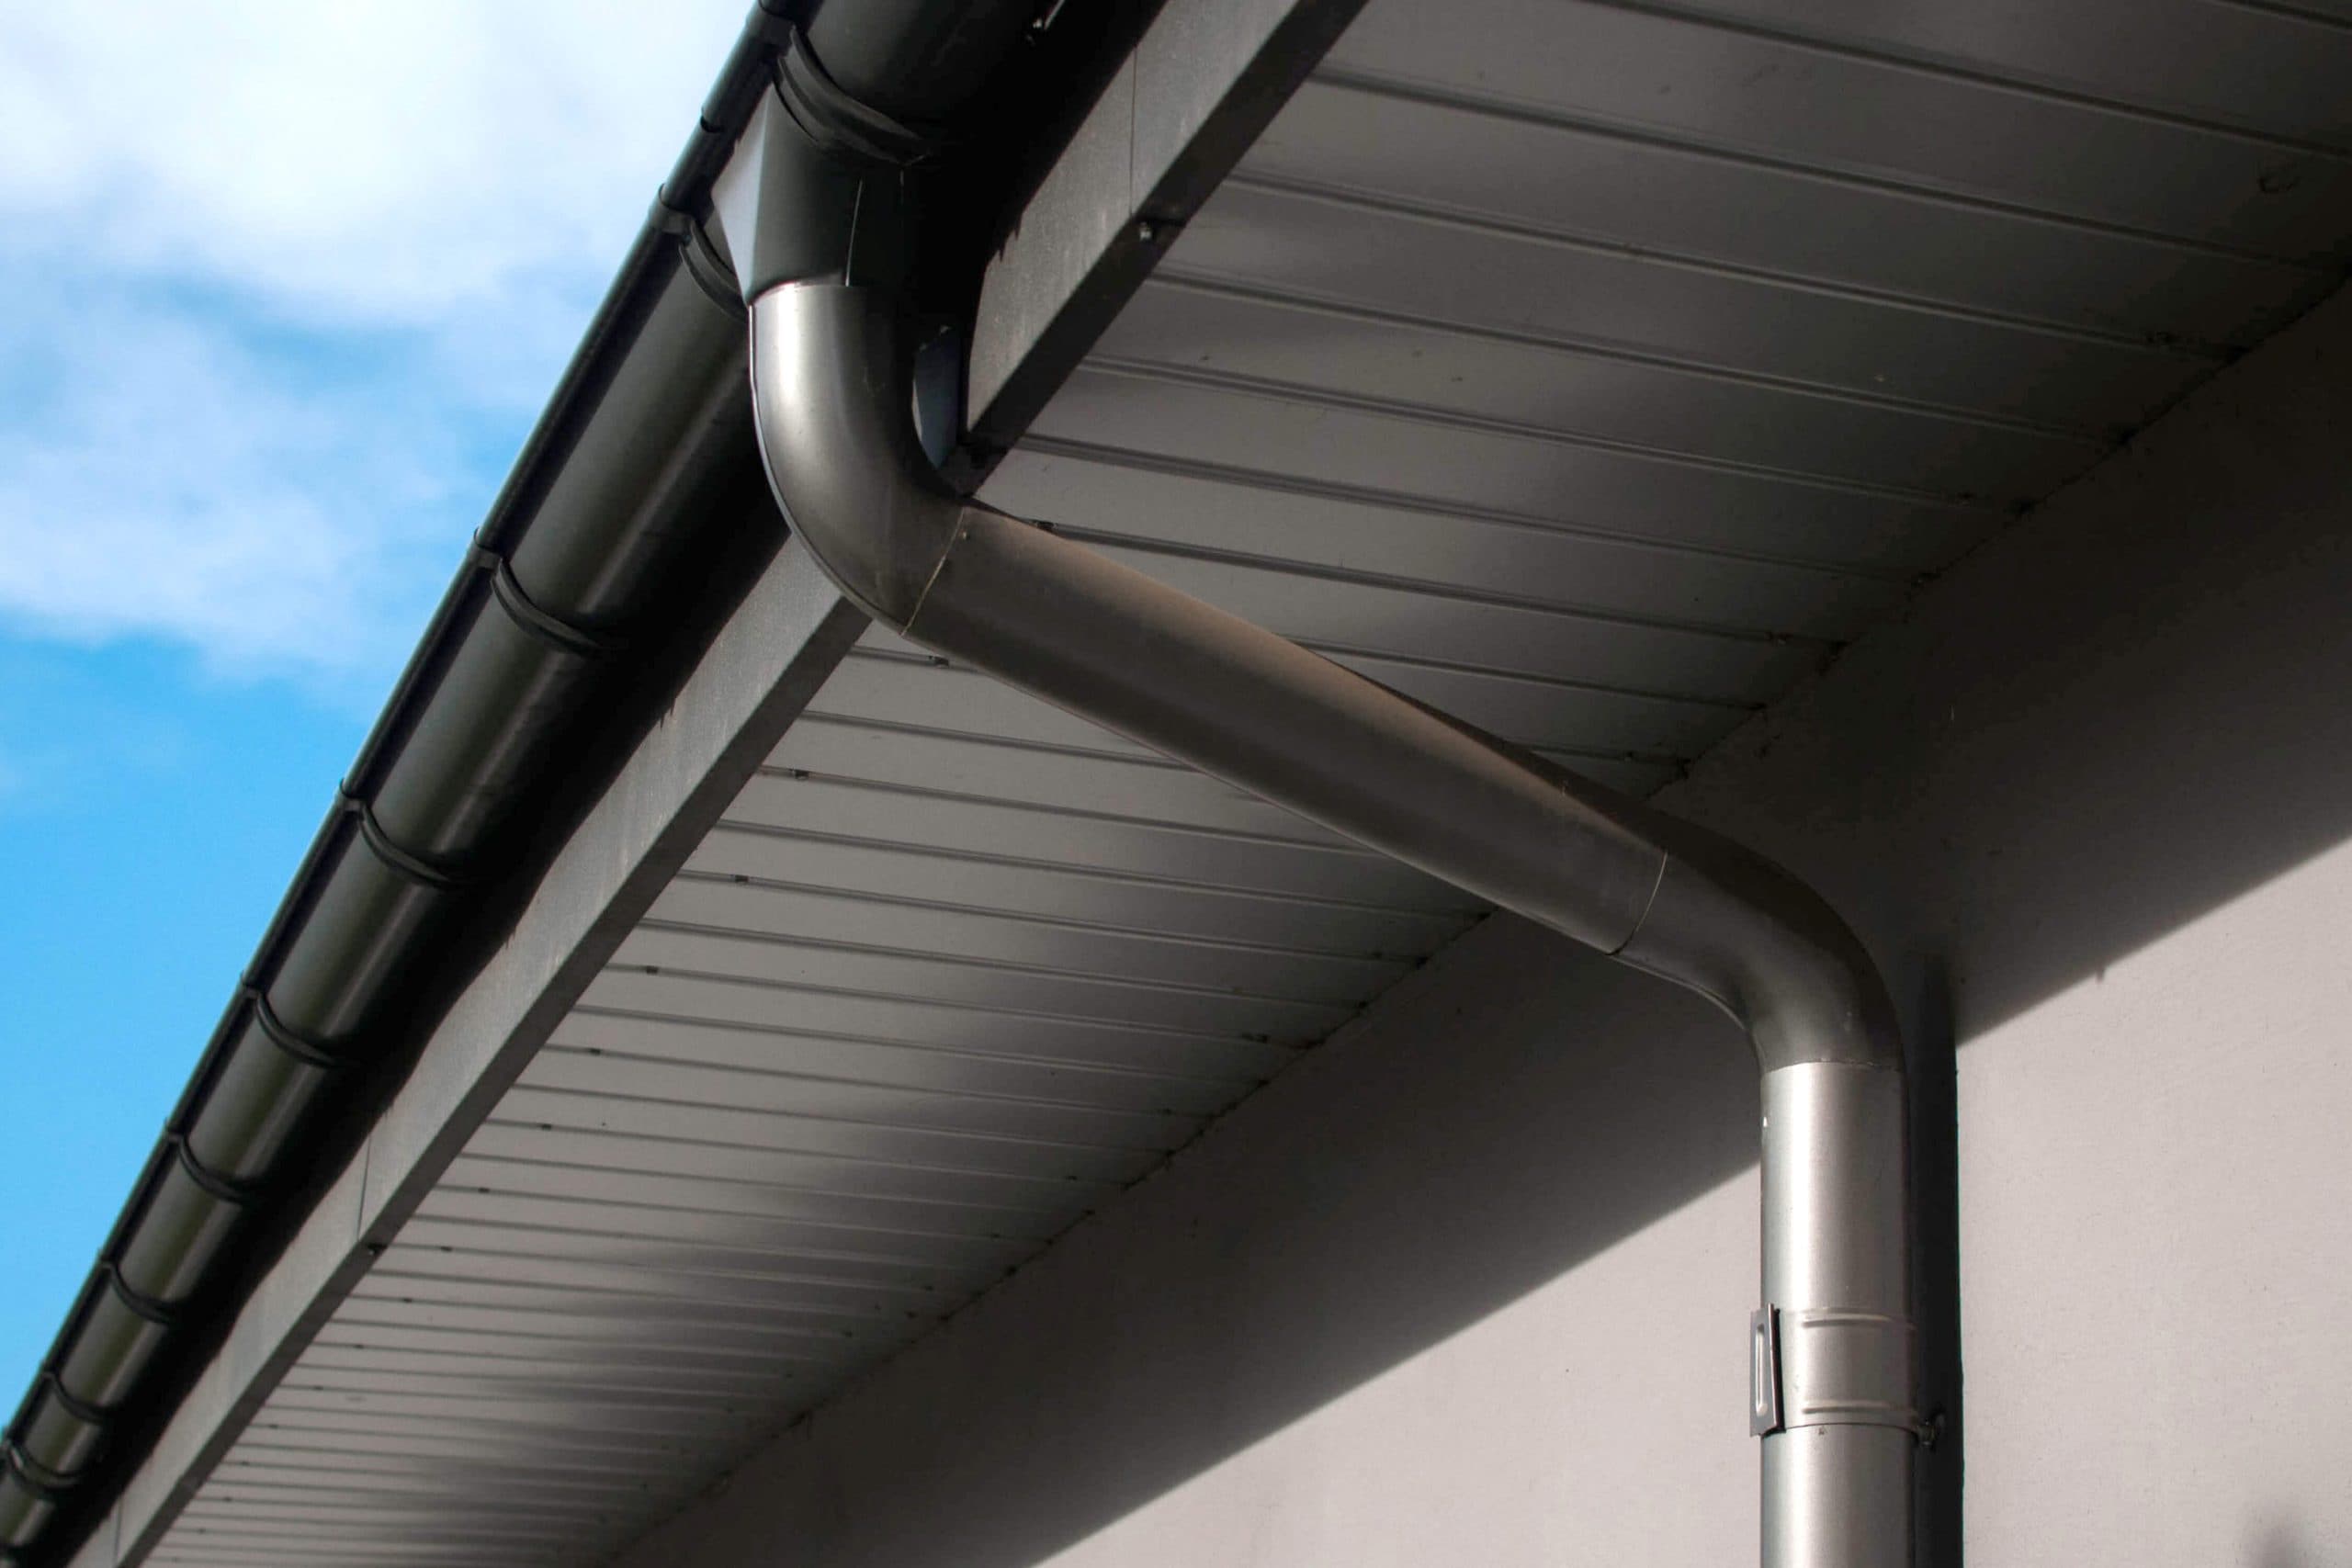 Reliable and affordable Galvanized gutters installation in Lake Charles